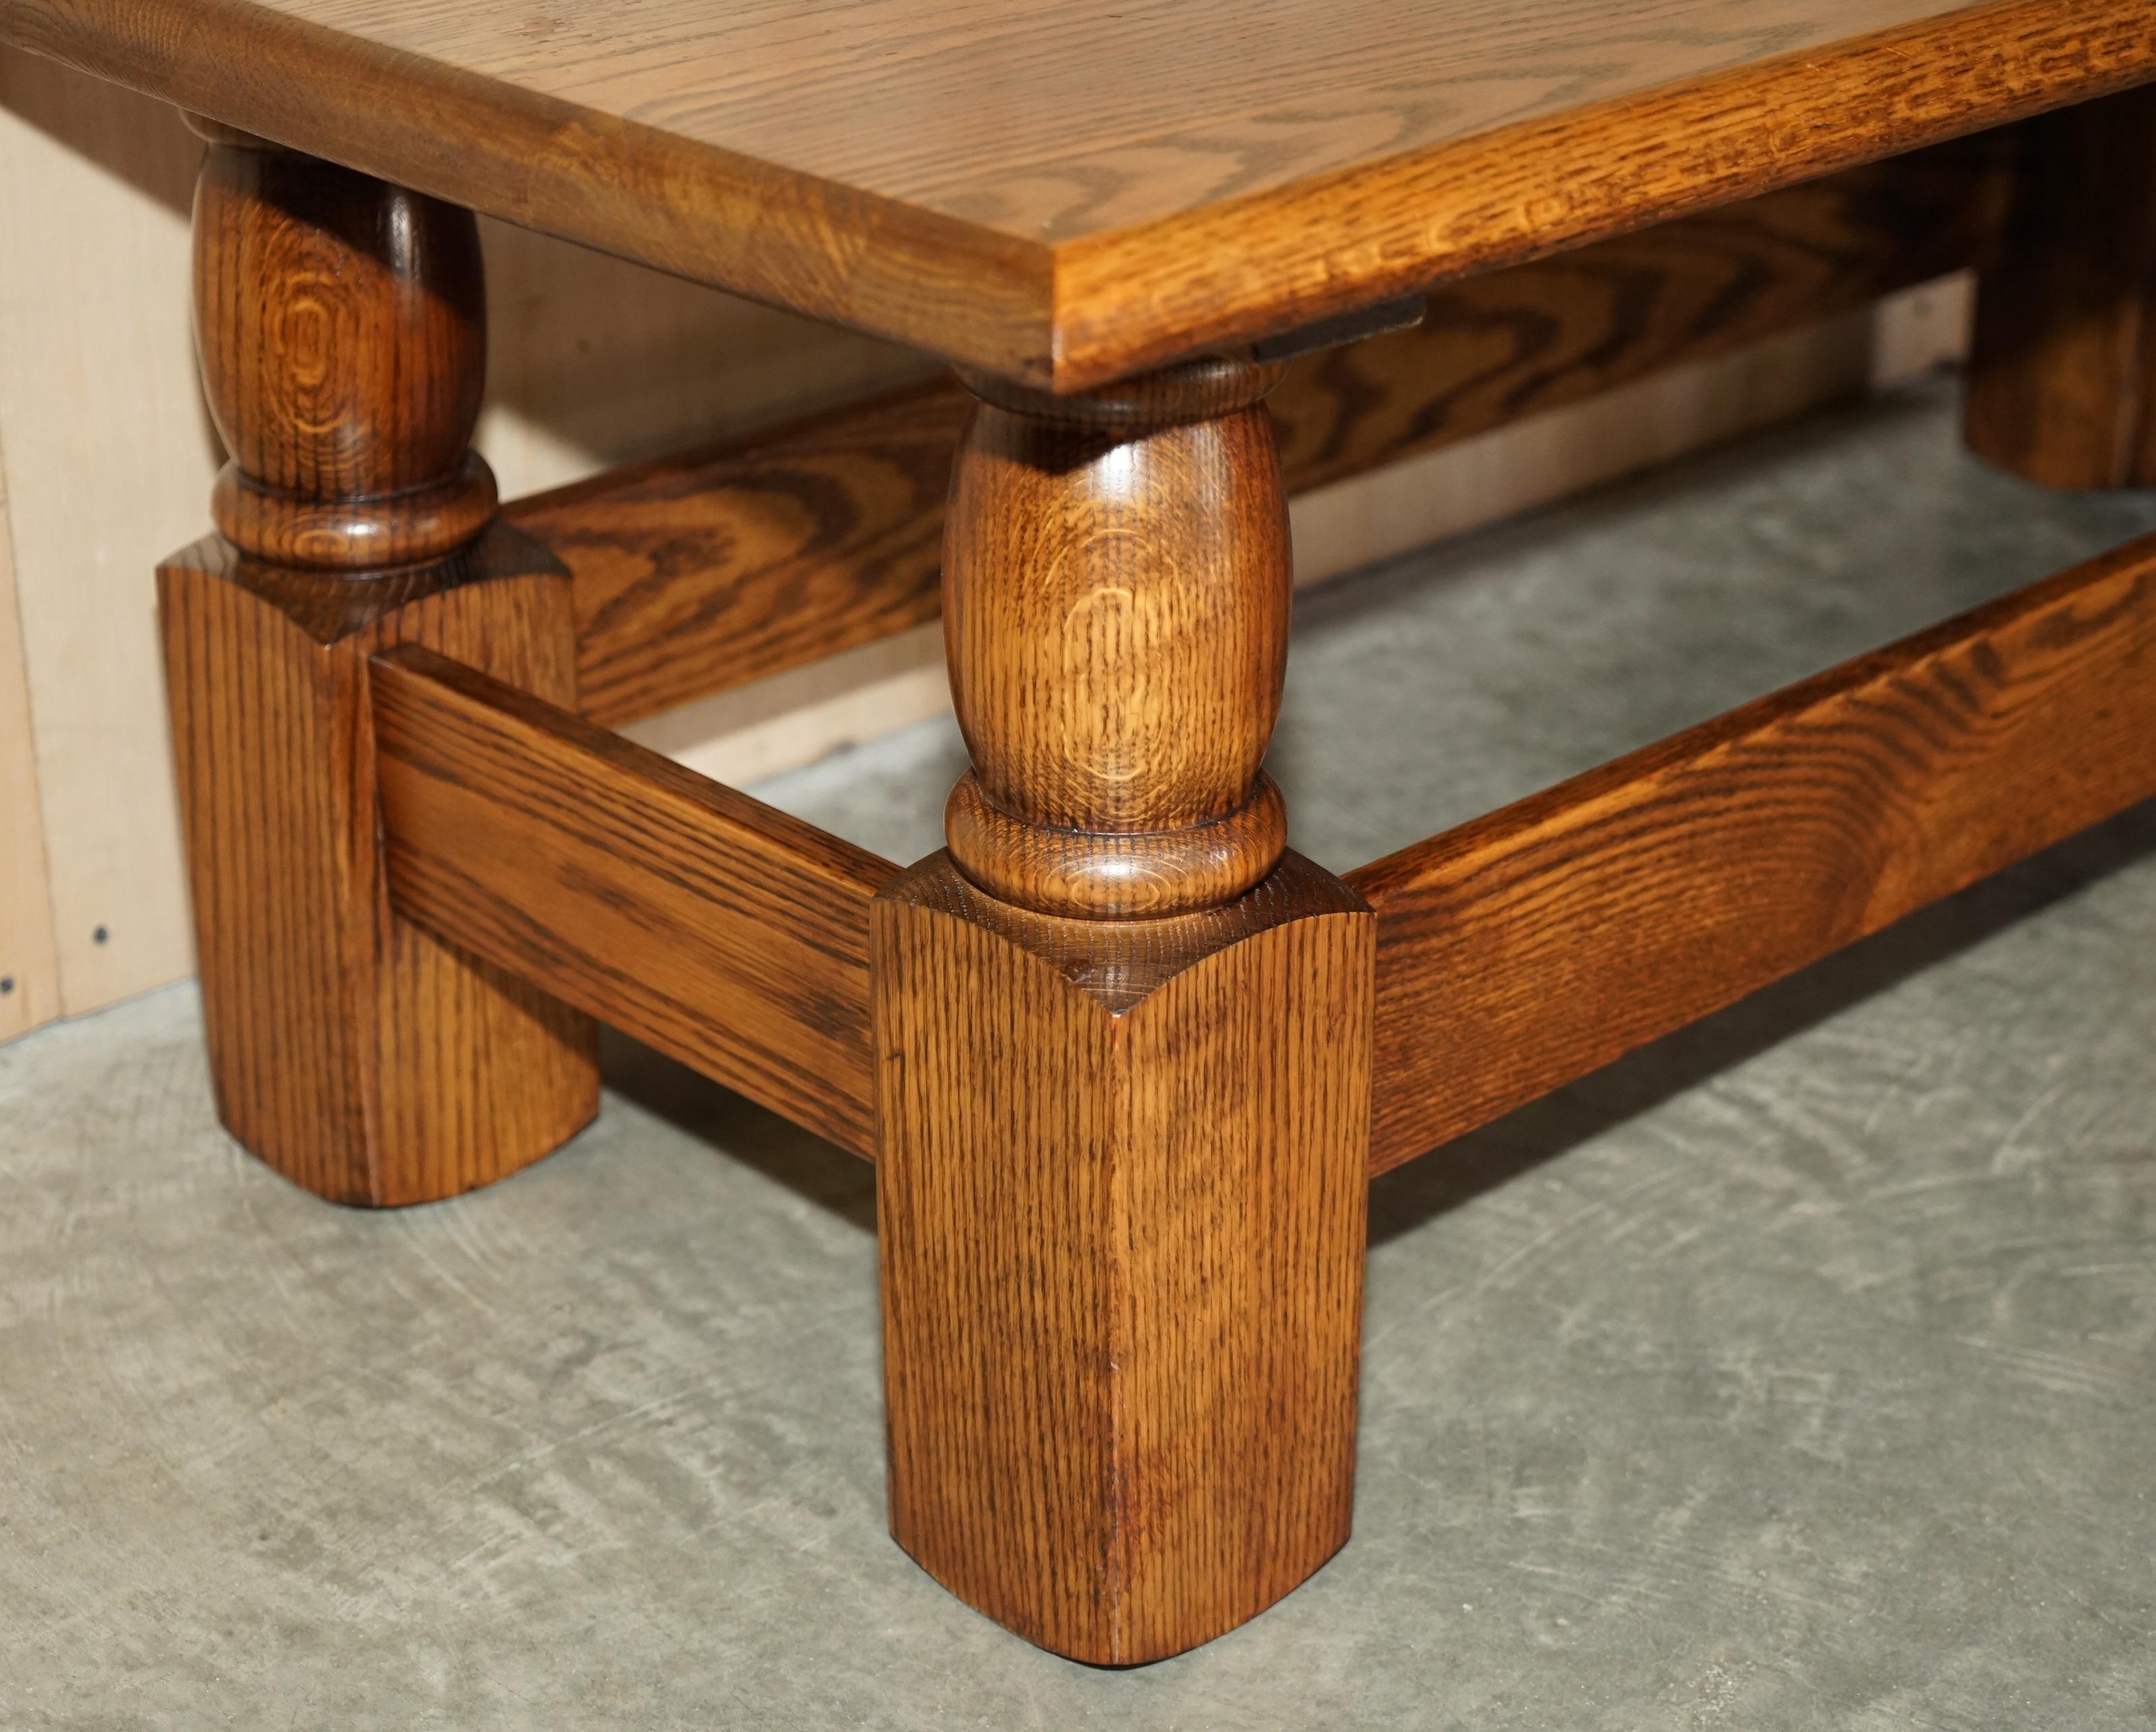 Vintage English Oak Coffee Table Made in the Style of Edwardian Refectory Tables For Sale 3